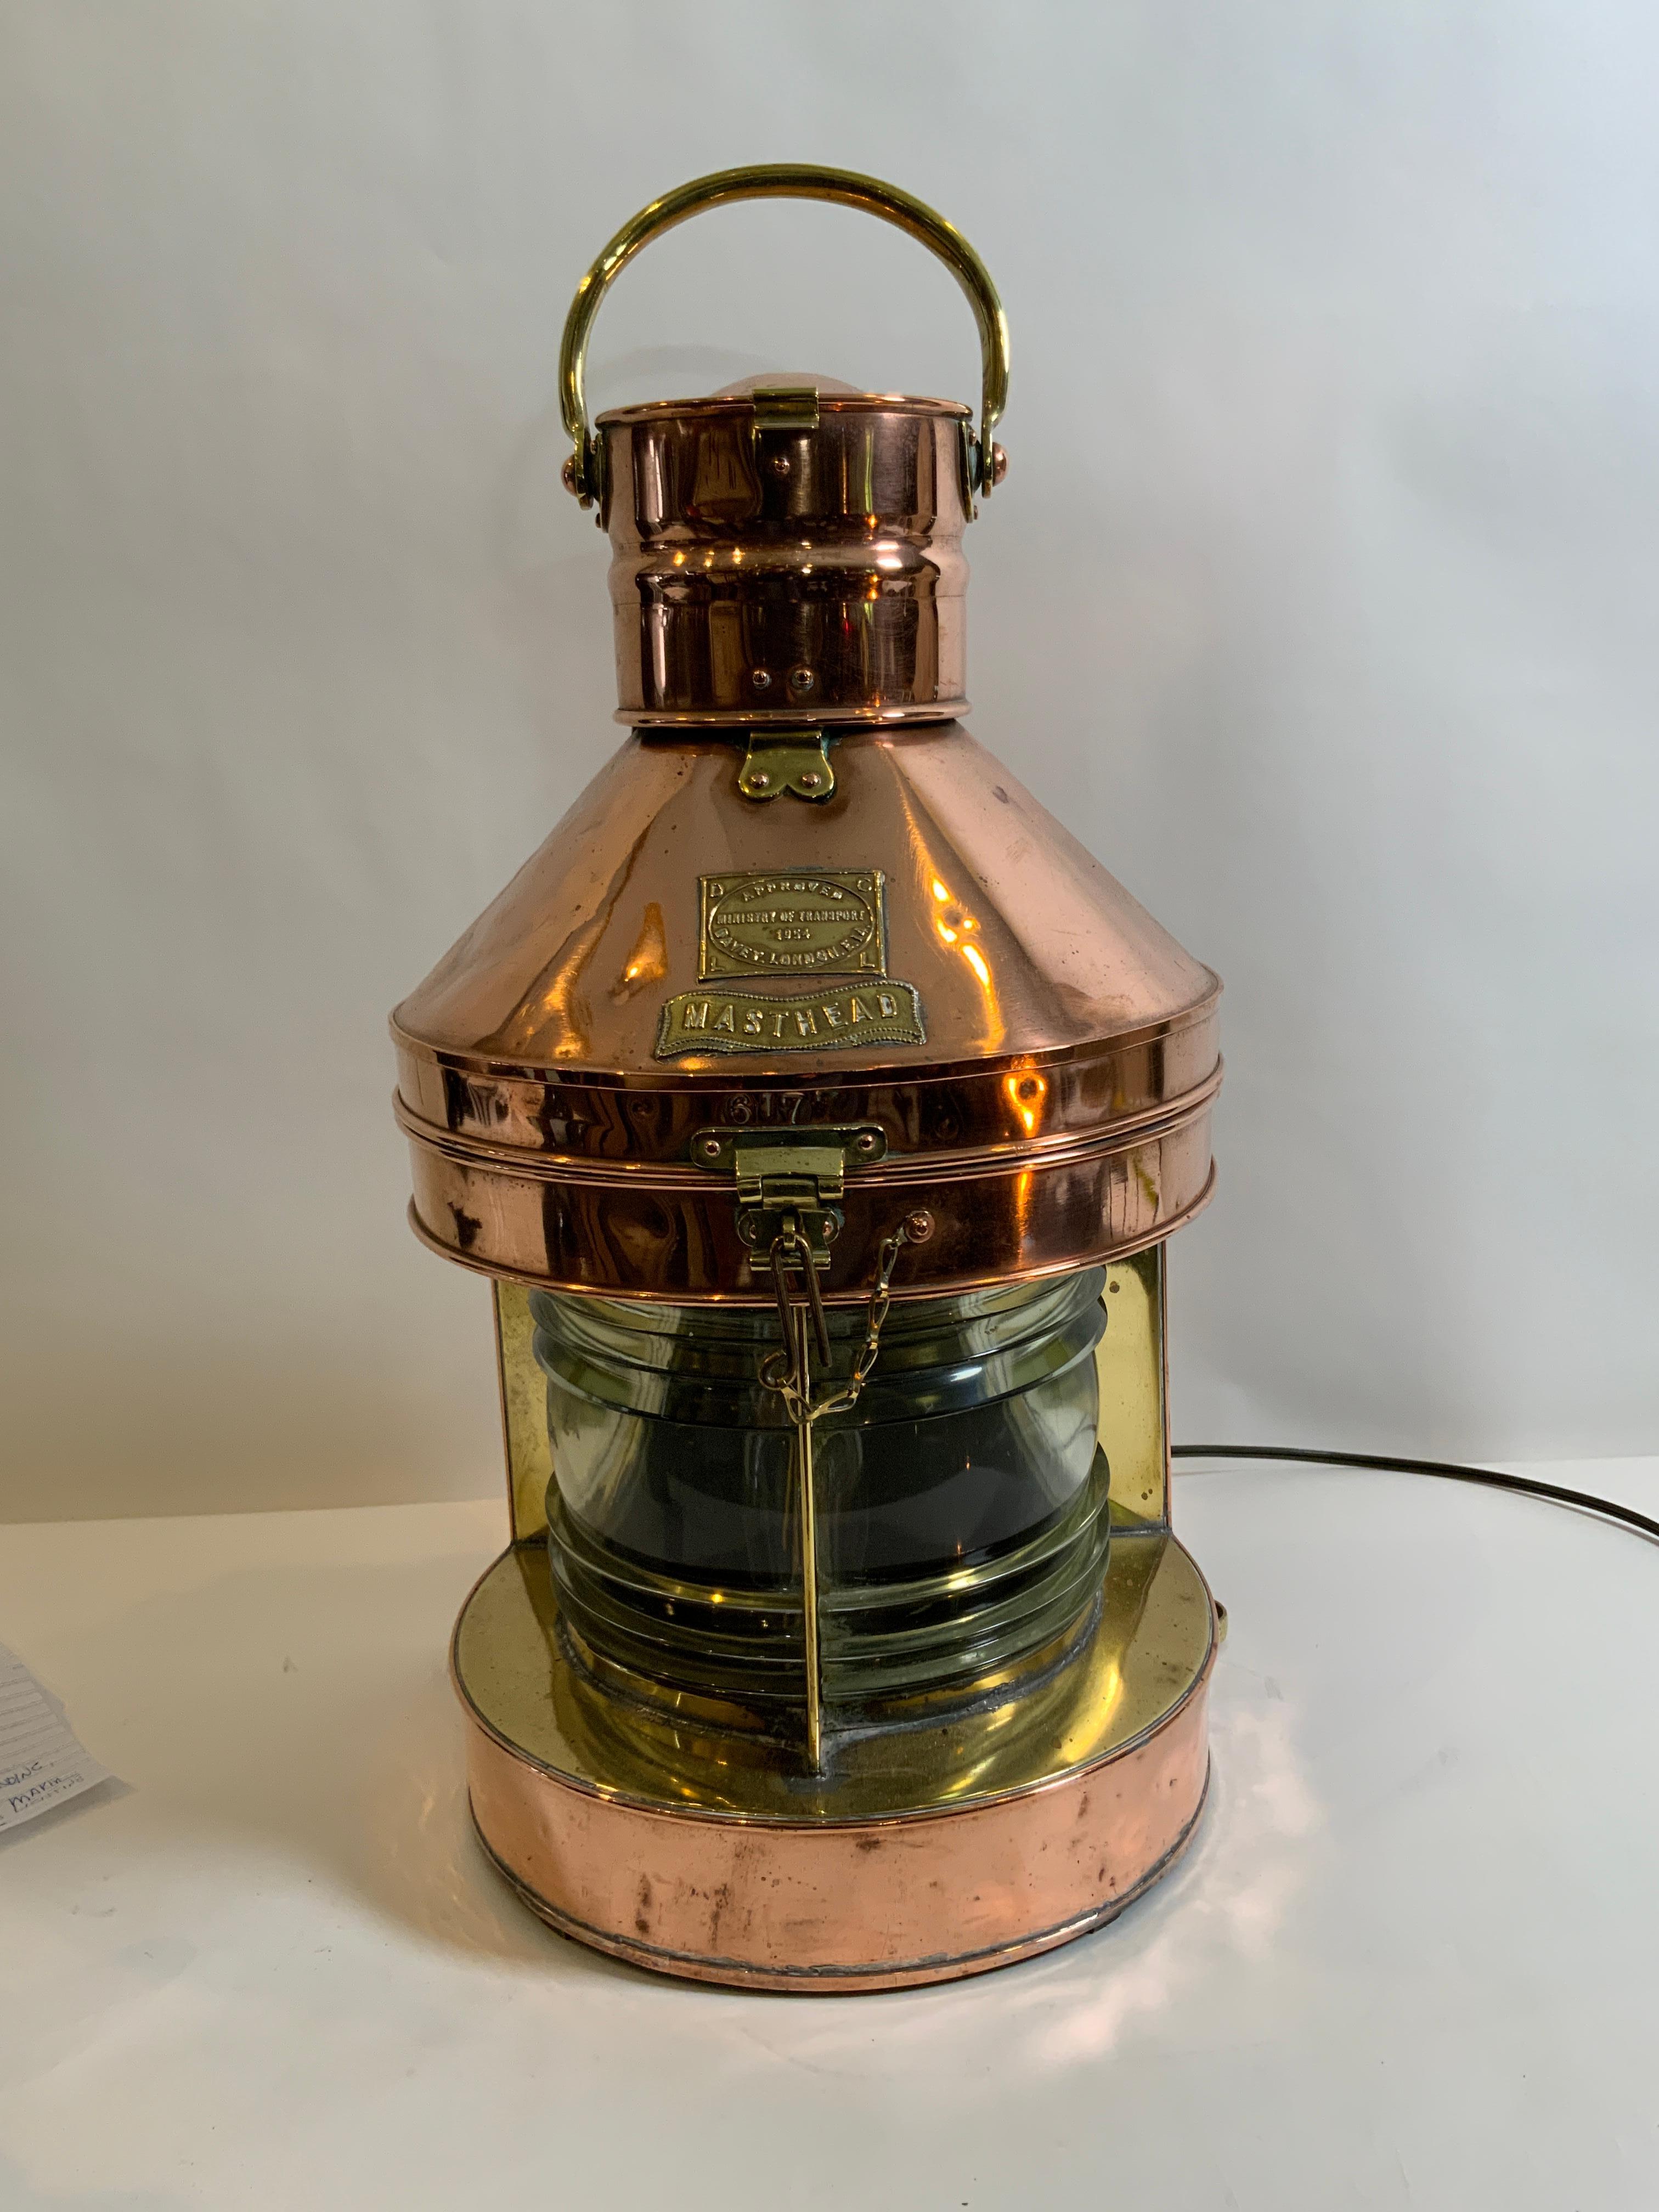 Highly polished copper ships lantern by Davey of London. Approved by the ministry of transport. Hinged top. Electrified for home use. Fresnel glass lenses. Heavy carry handle. Outstanding. Circa 1954. Davey is a venerable lantern maker, building